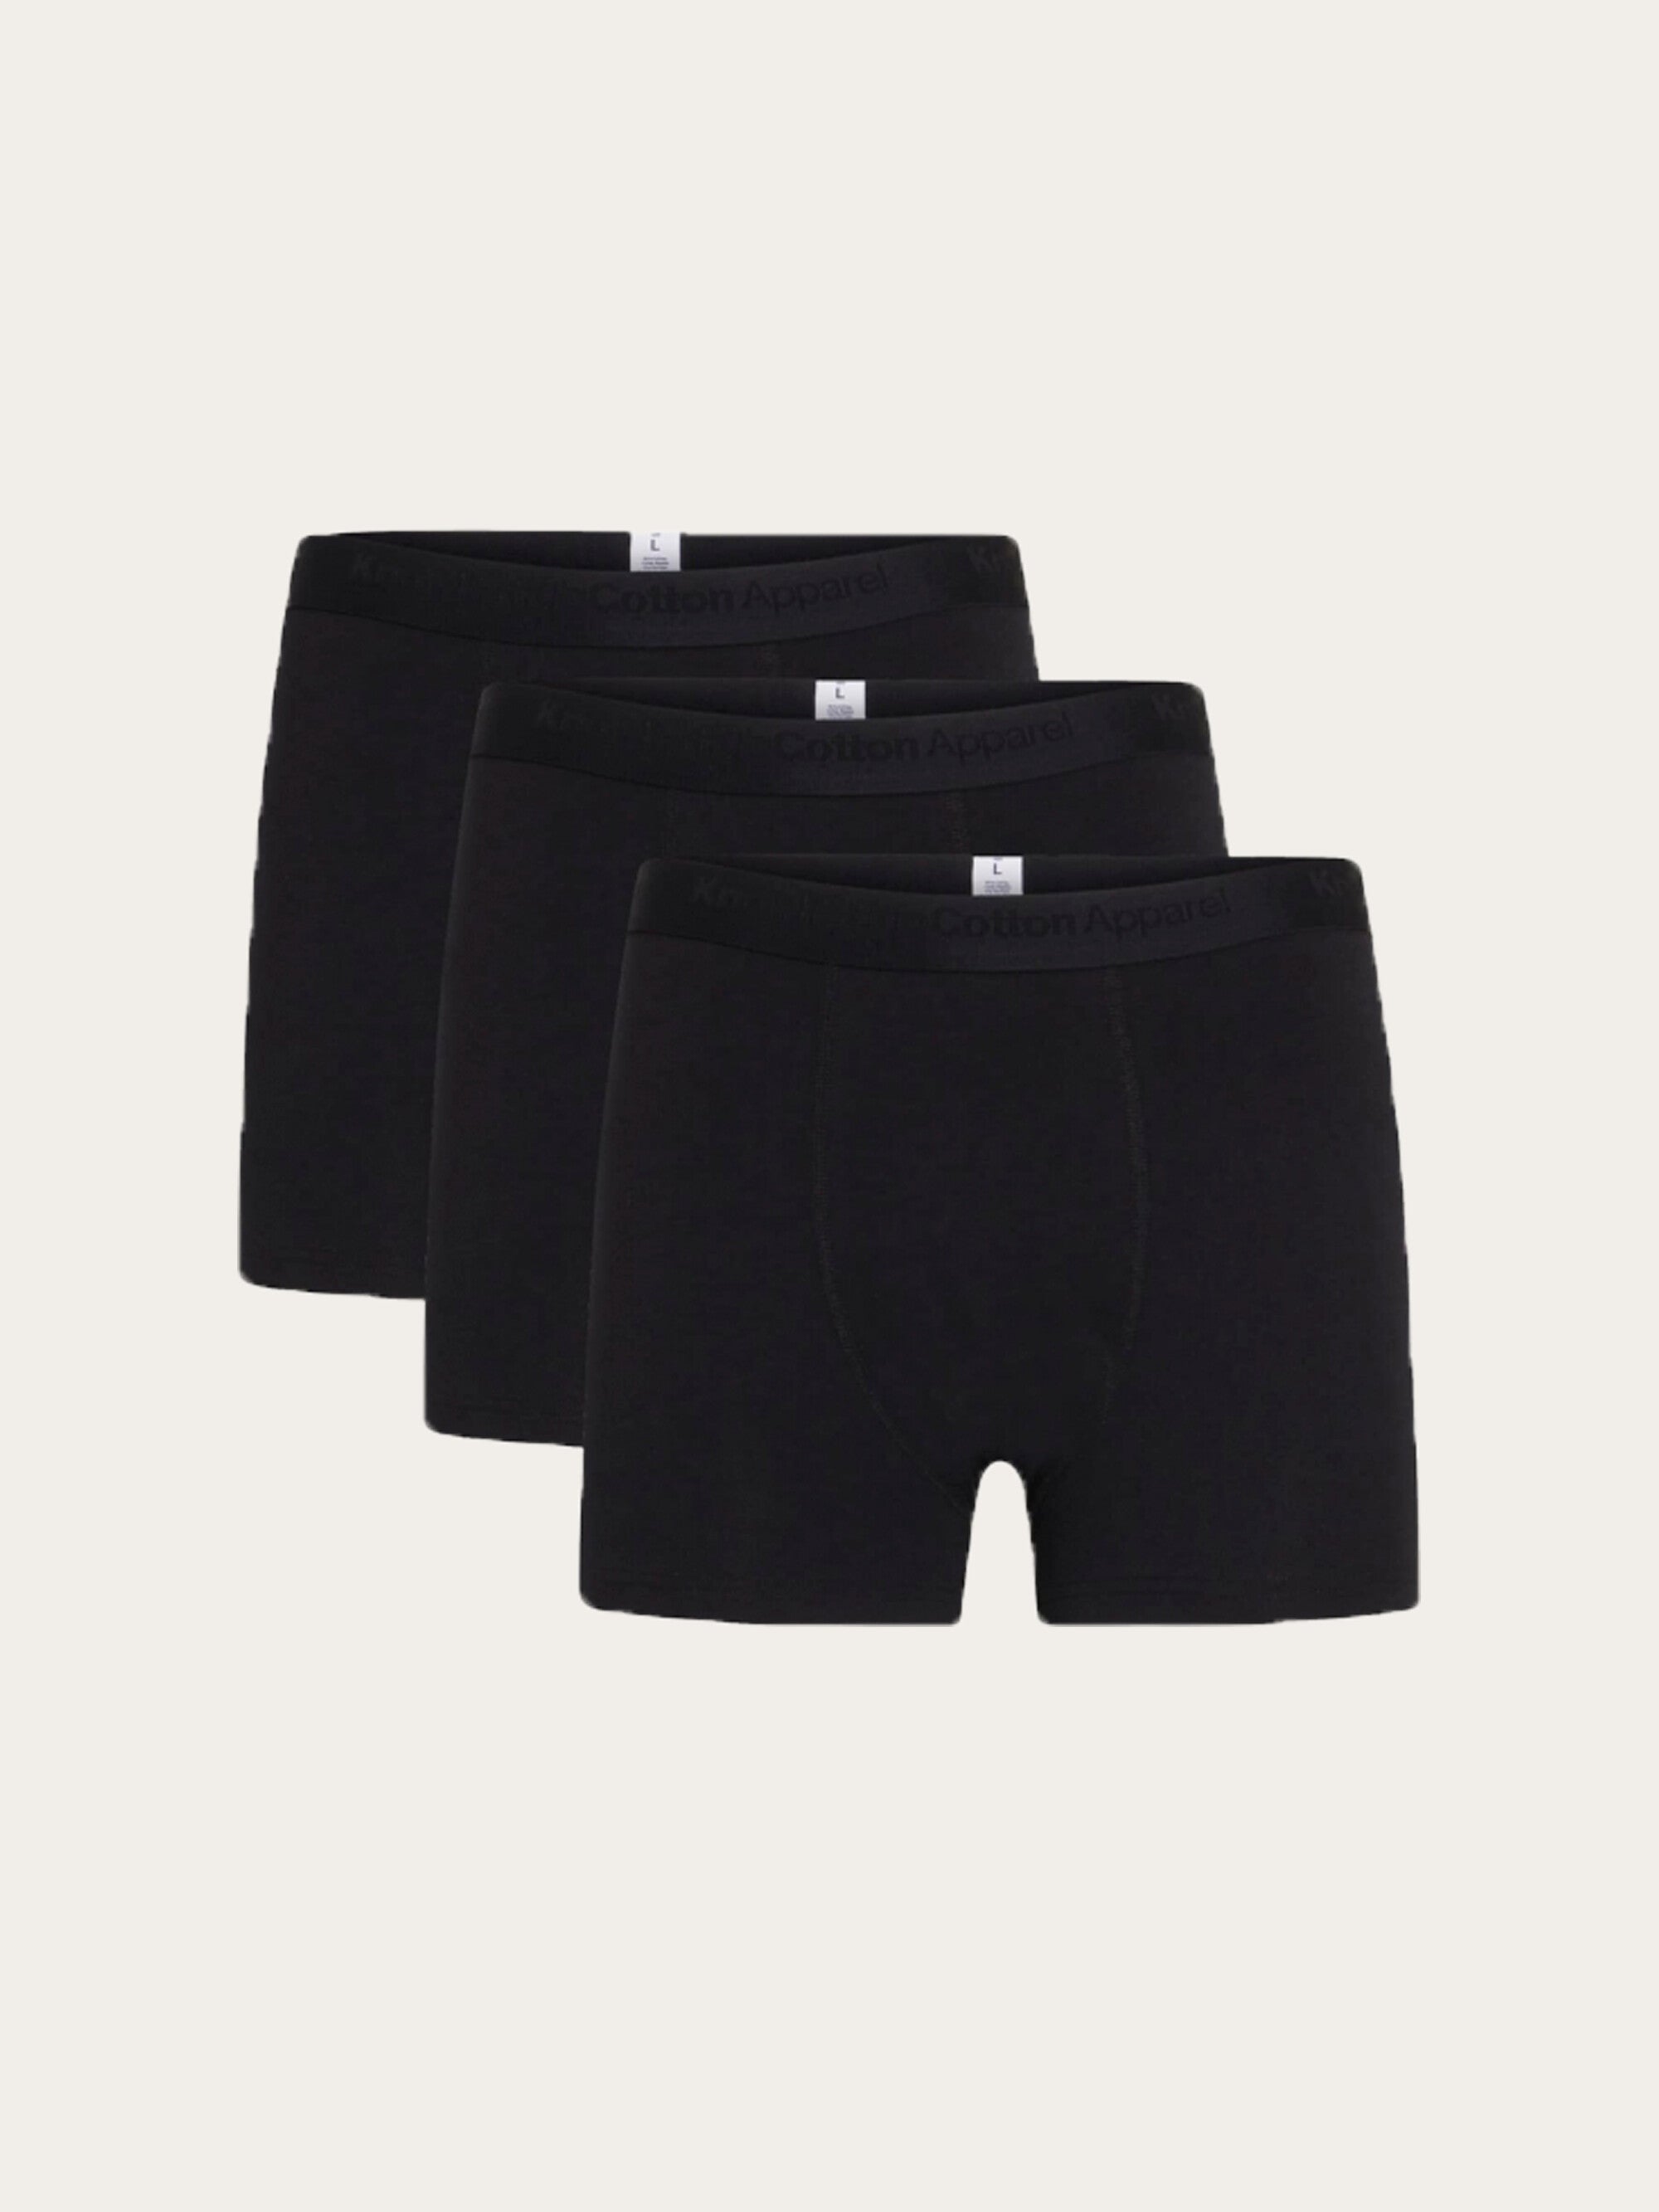 Buy 3-pack underwear - Black Jet - from KnowledgeCotton Apparel®